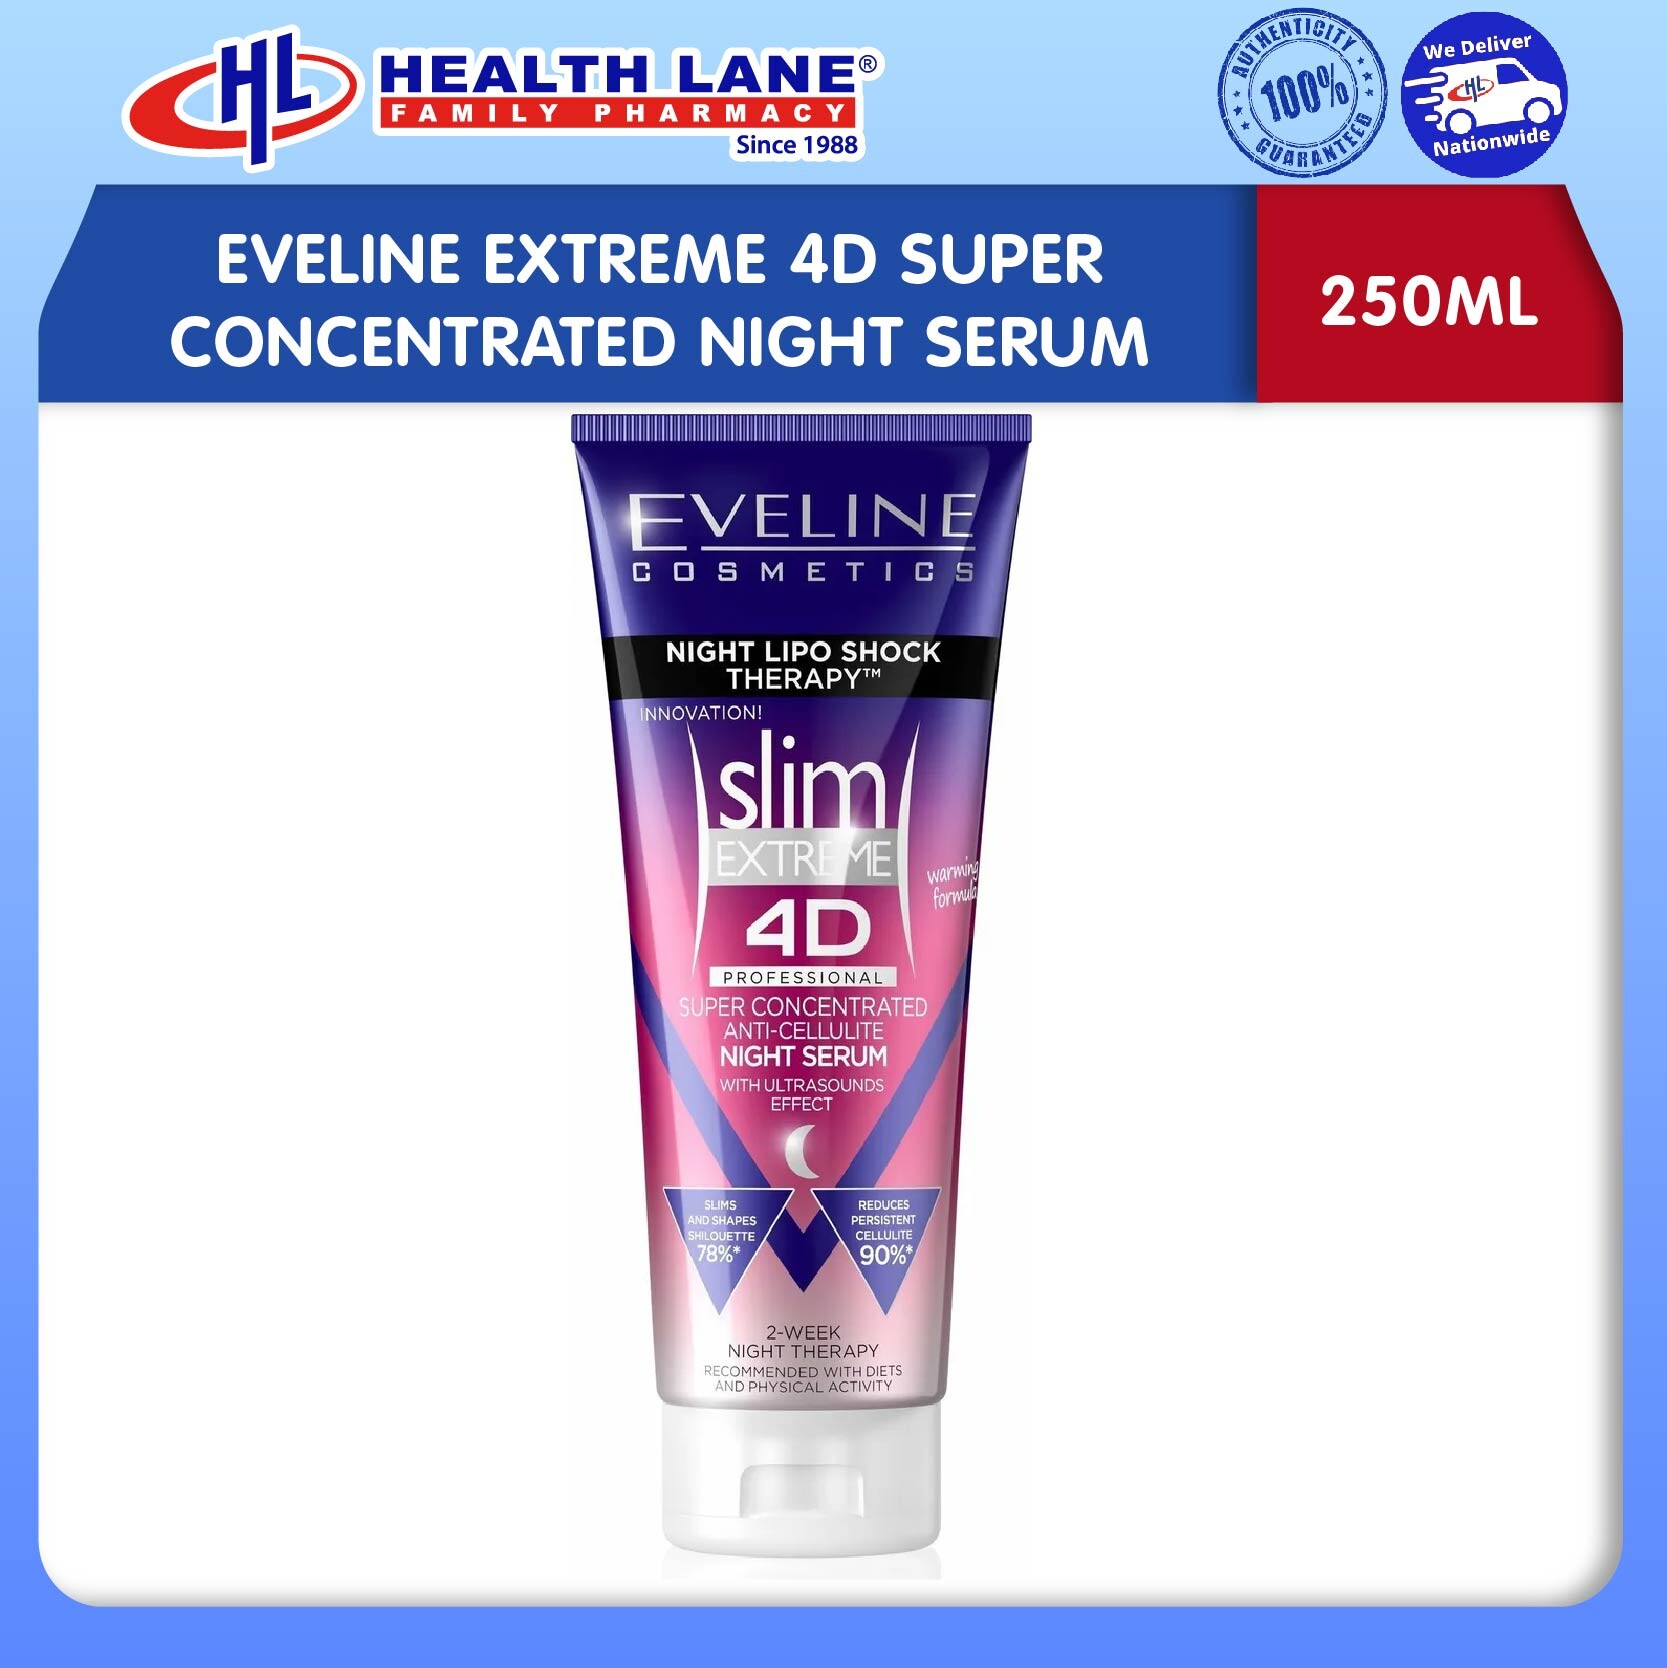 EVELINE EXTREME 4D SUPER CONCENTRATED NIGHT SERUM (250ML)